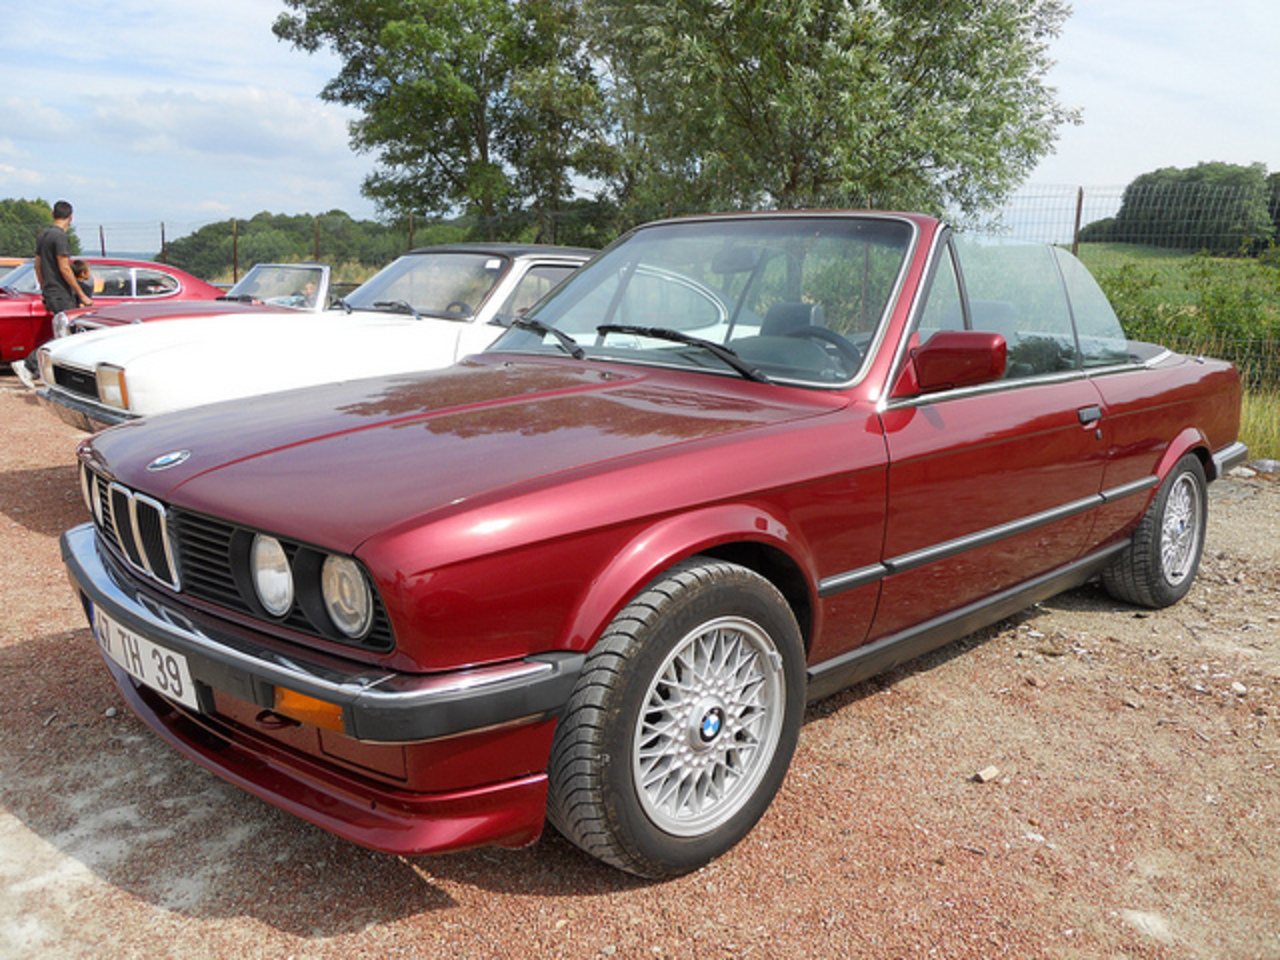 BMW 3 Series Cabriolet (E30) | Flickr - Photo Sharing!